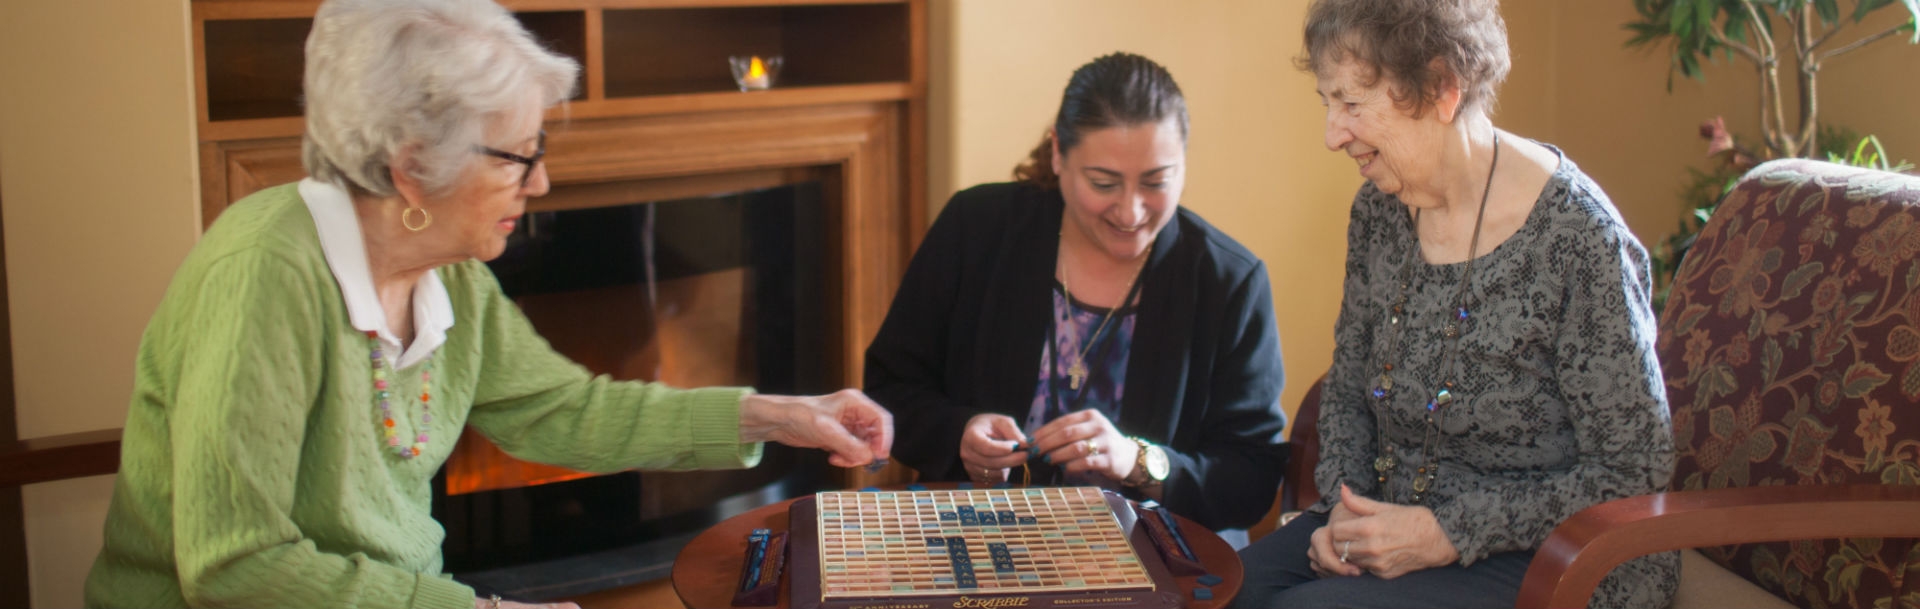 Resident and workers playing a game